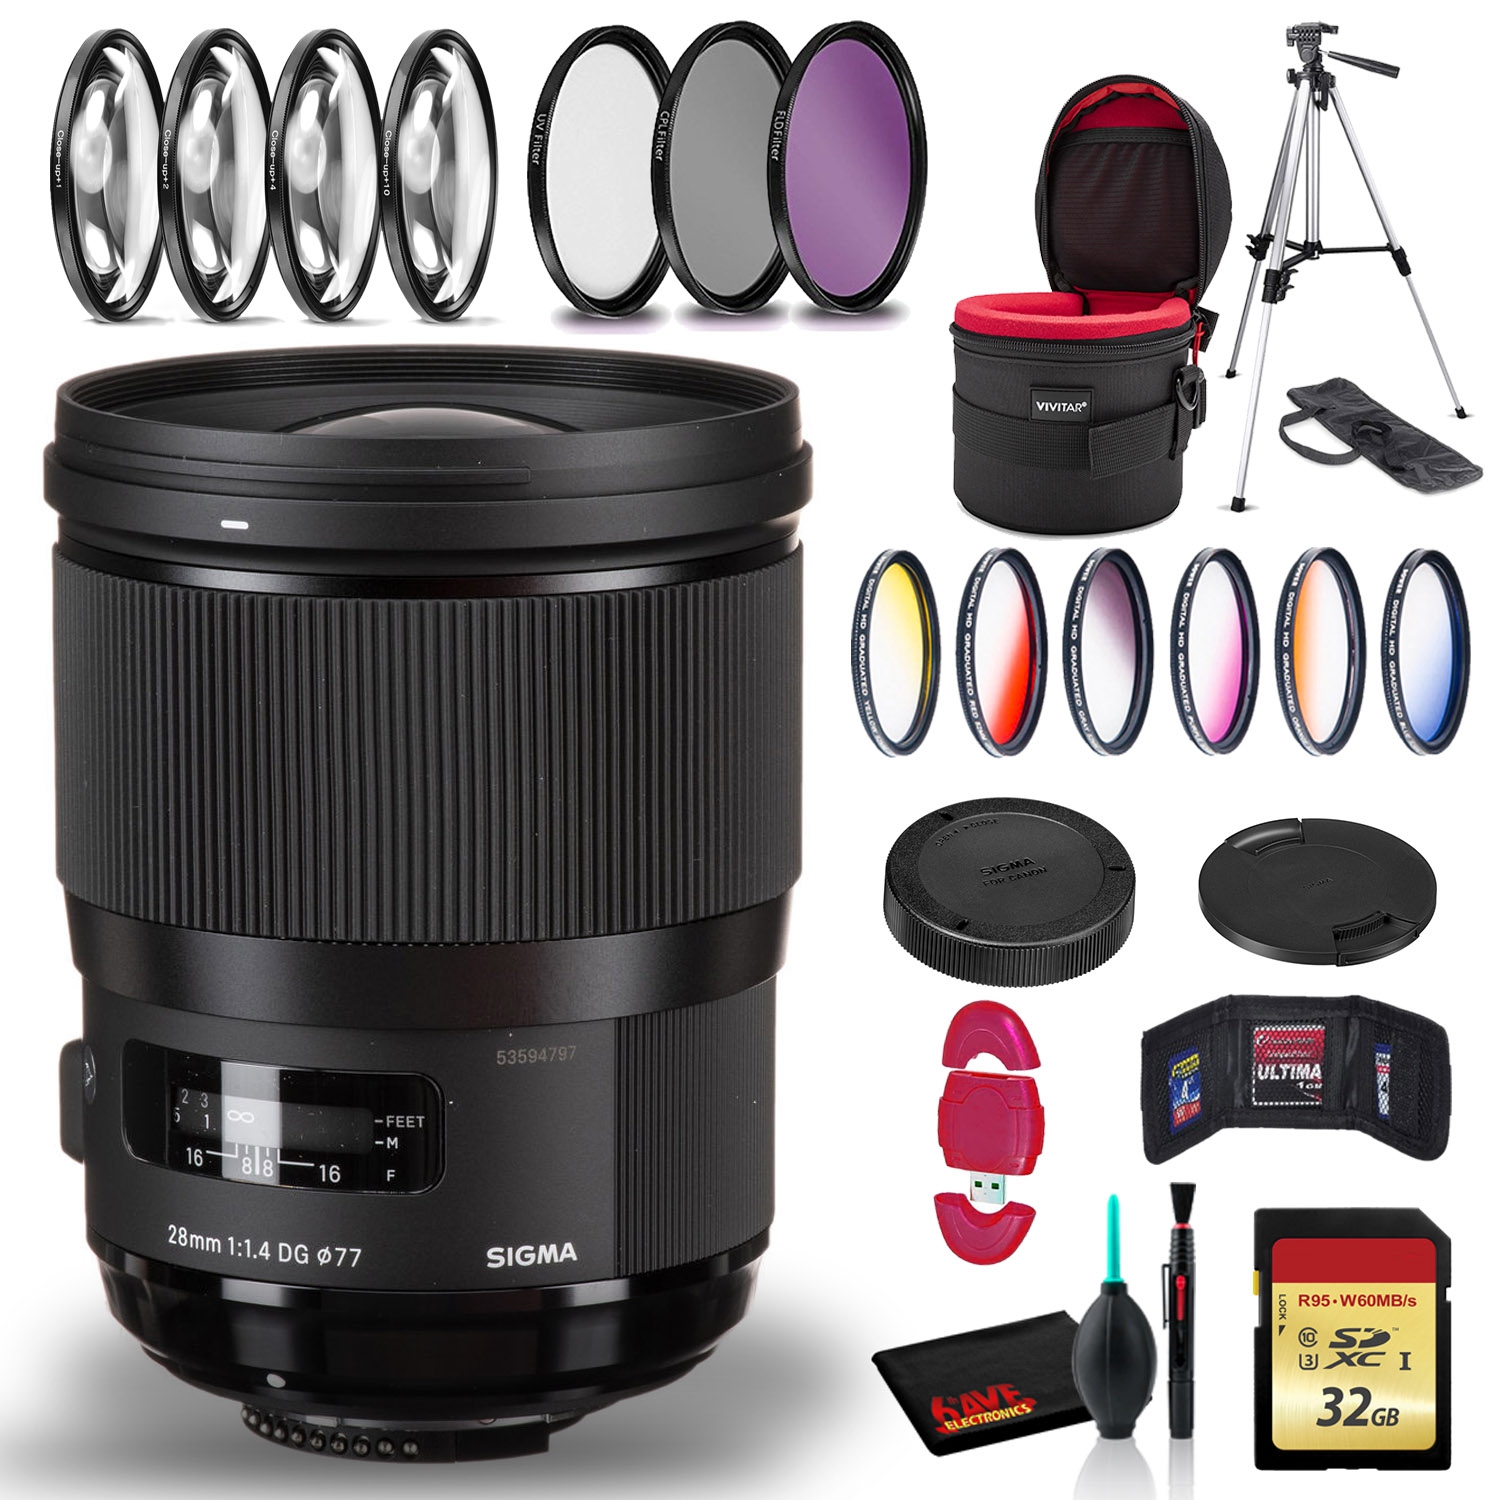 Sigma 28mm f/1.4 DG HSM Art Lens for Nikon F with Cleaning Kit, Full Size Tripod, 32GB Memory Kit, Filter Kits, and Case Bundle